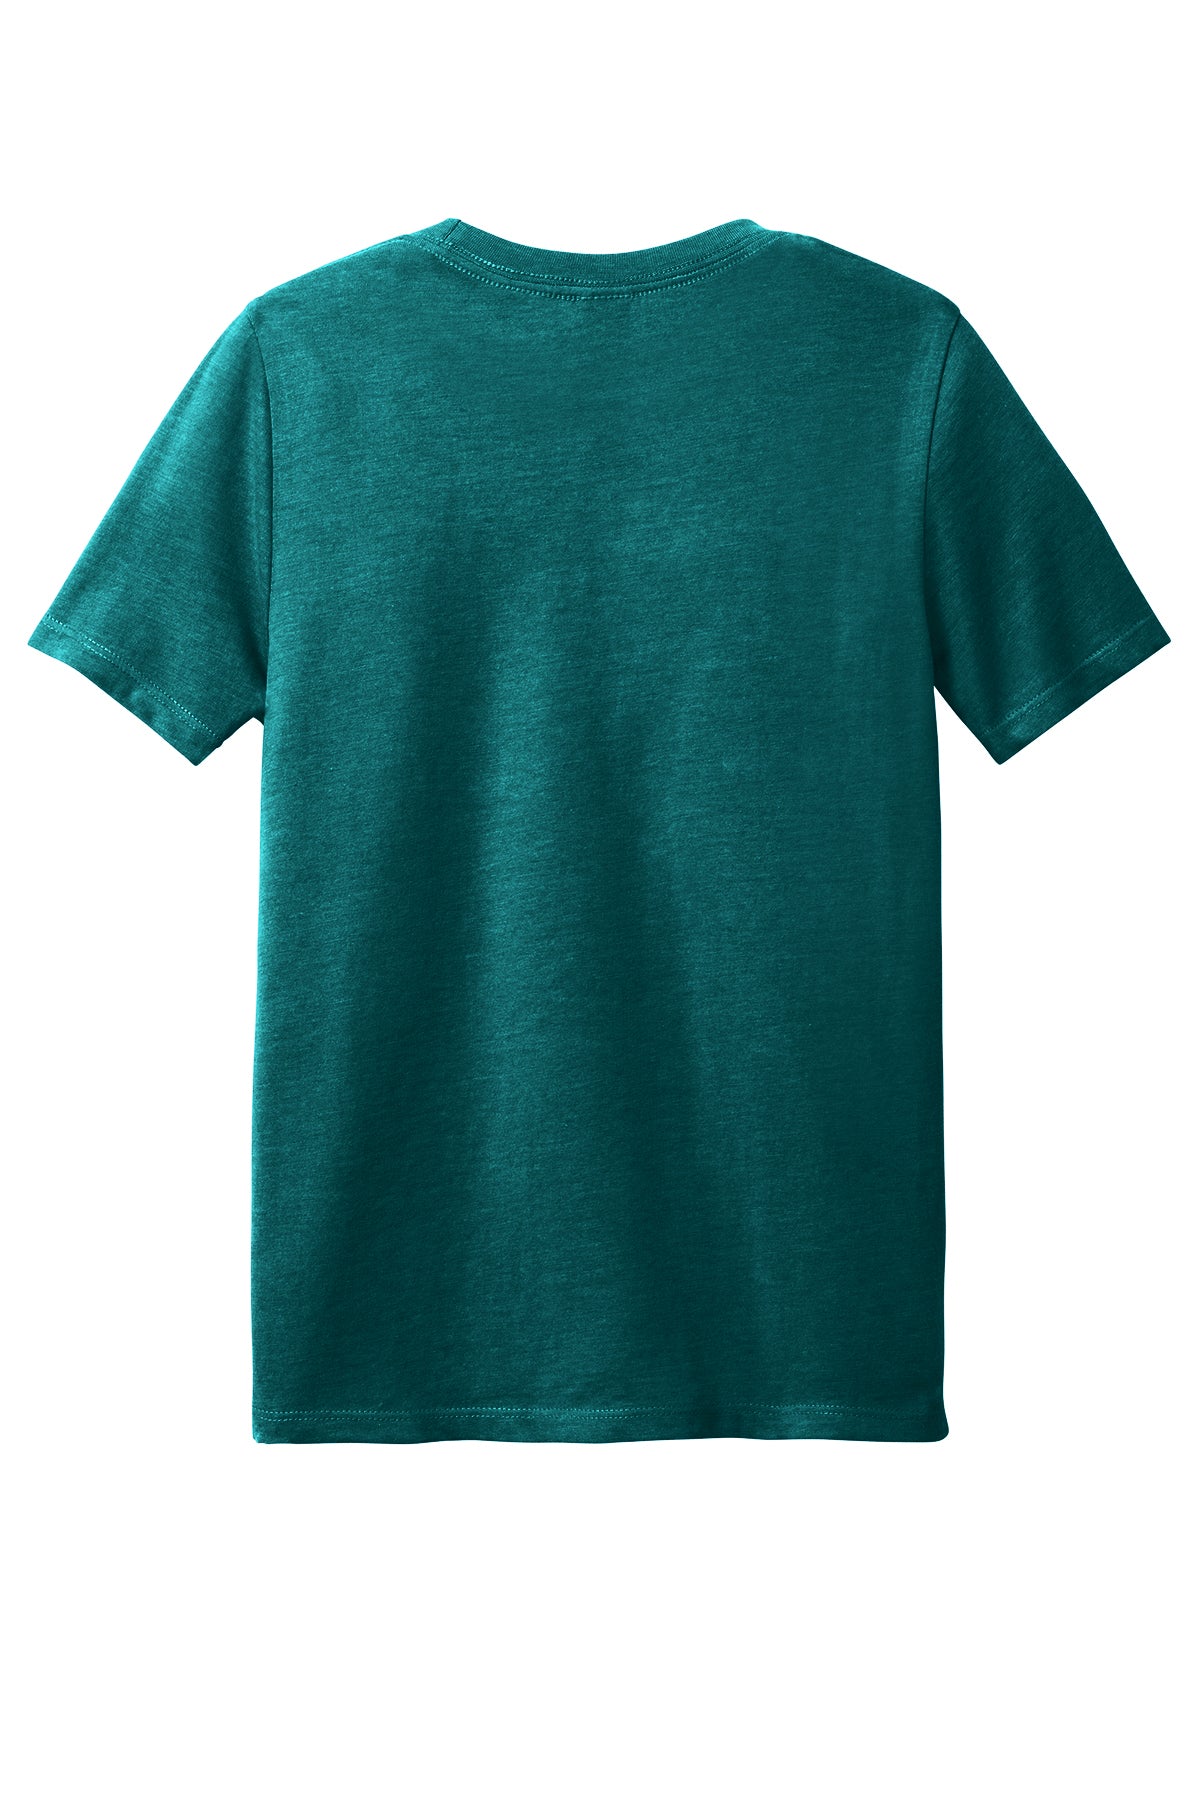 DT108Y District ® Youth Perfect Blend ® CVC Tee